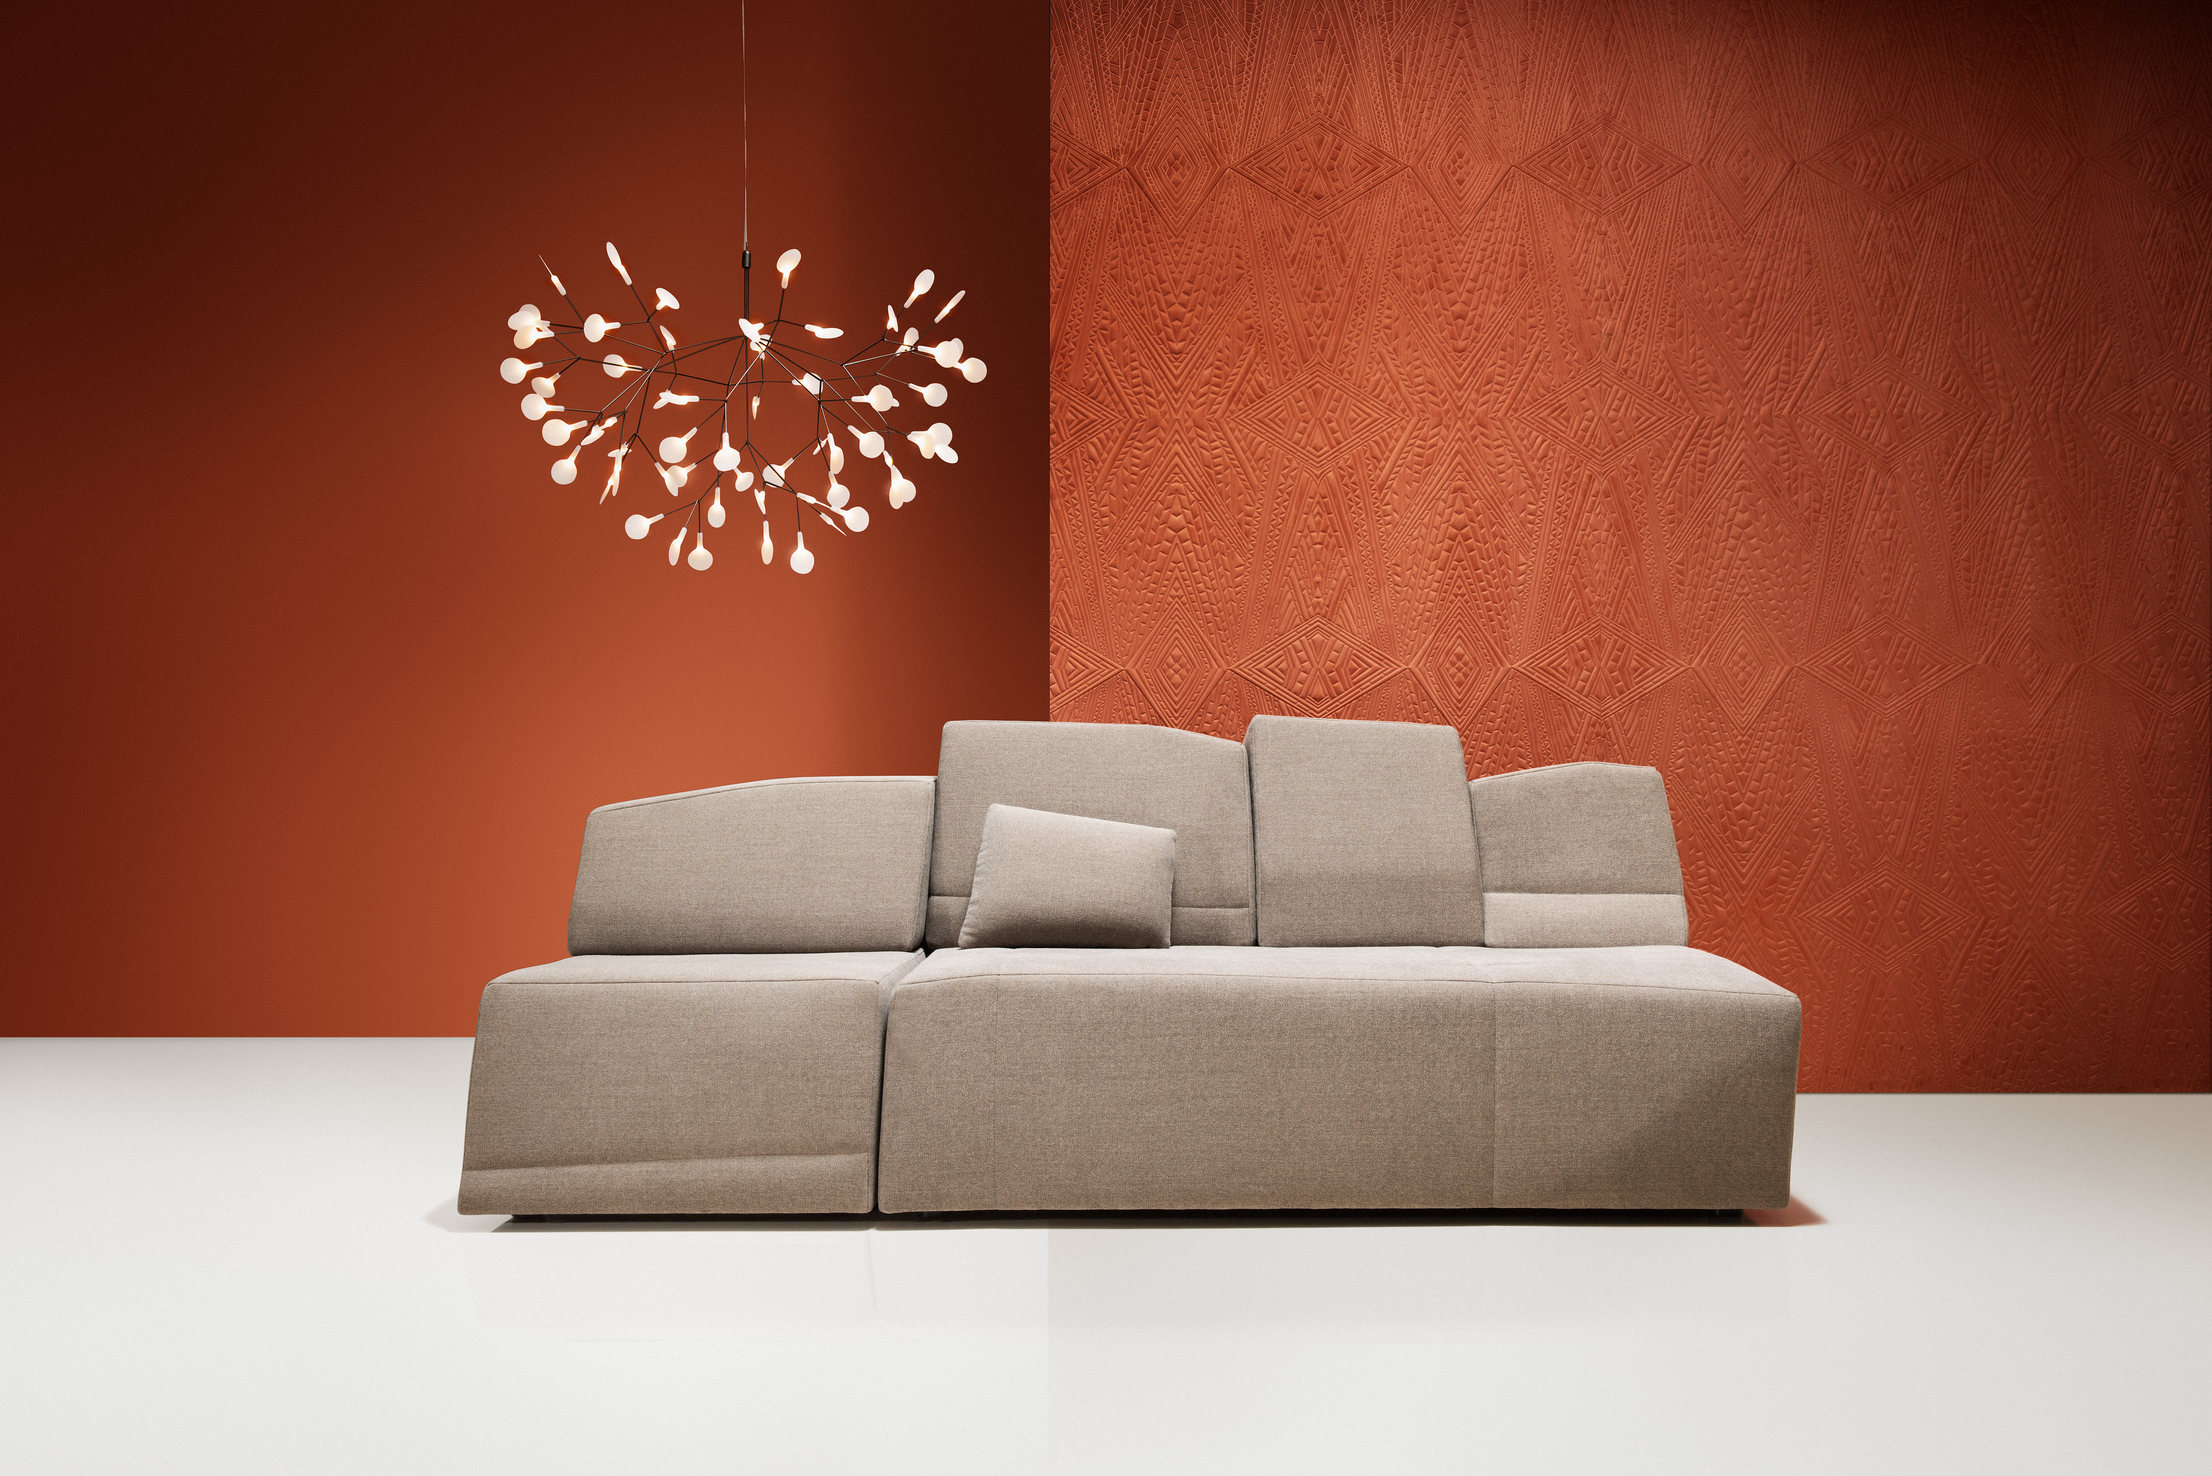 Poetic composition SLT Sofa and Heracleum suspension light